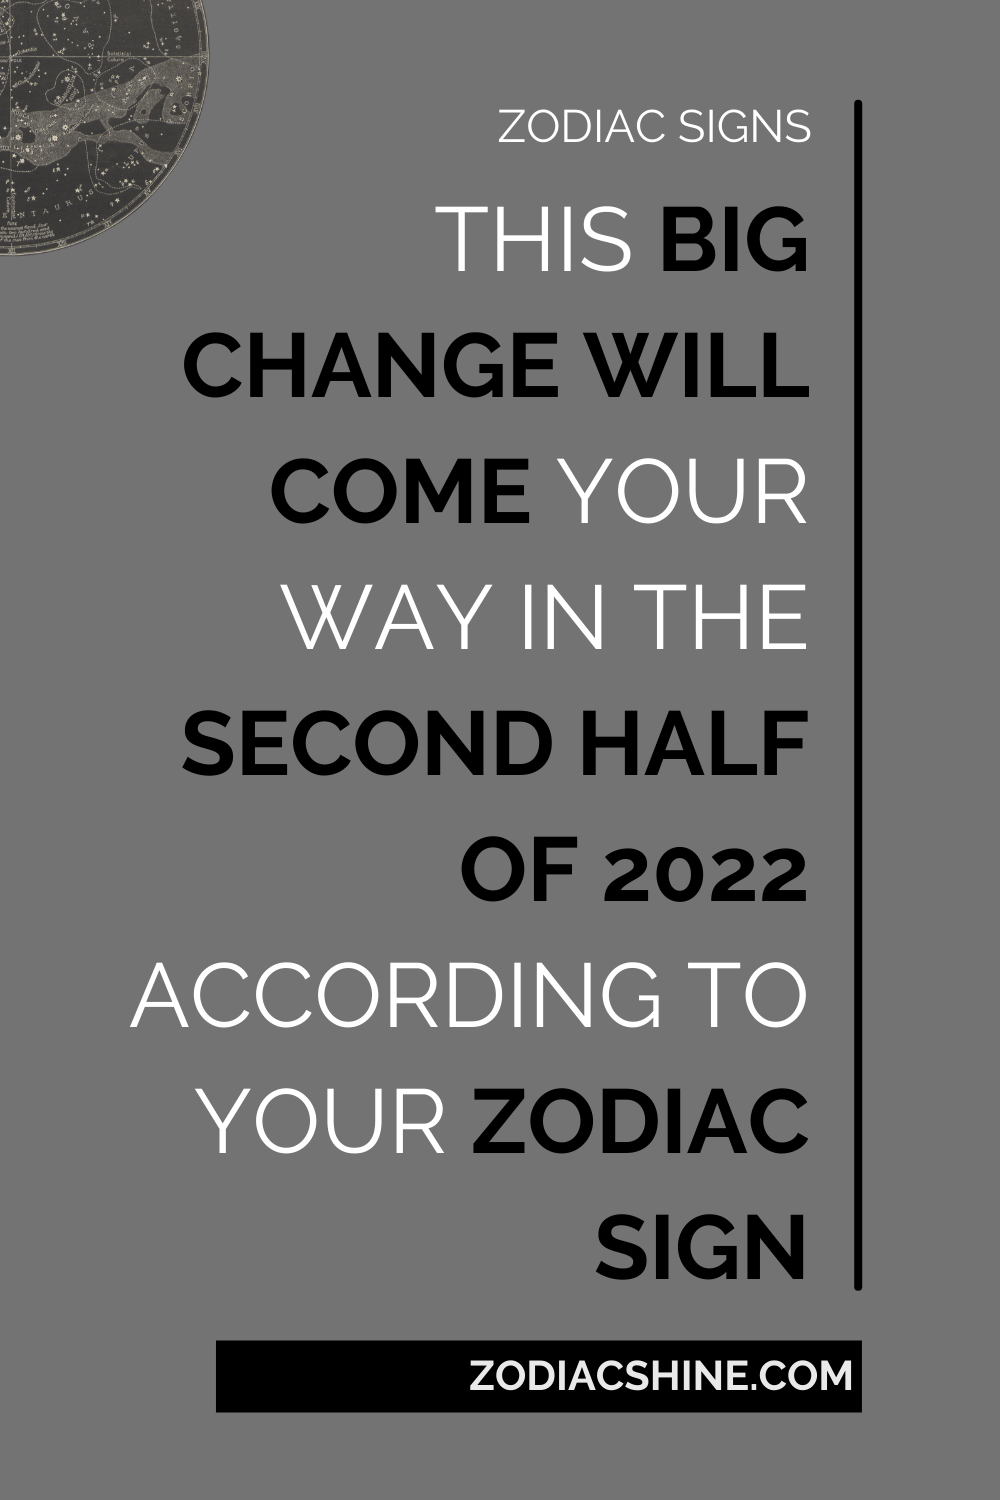 This Big Change Will Come Your Way In The Second Half Of 2022 According To Your Zodiac Sign